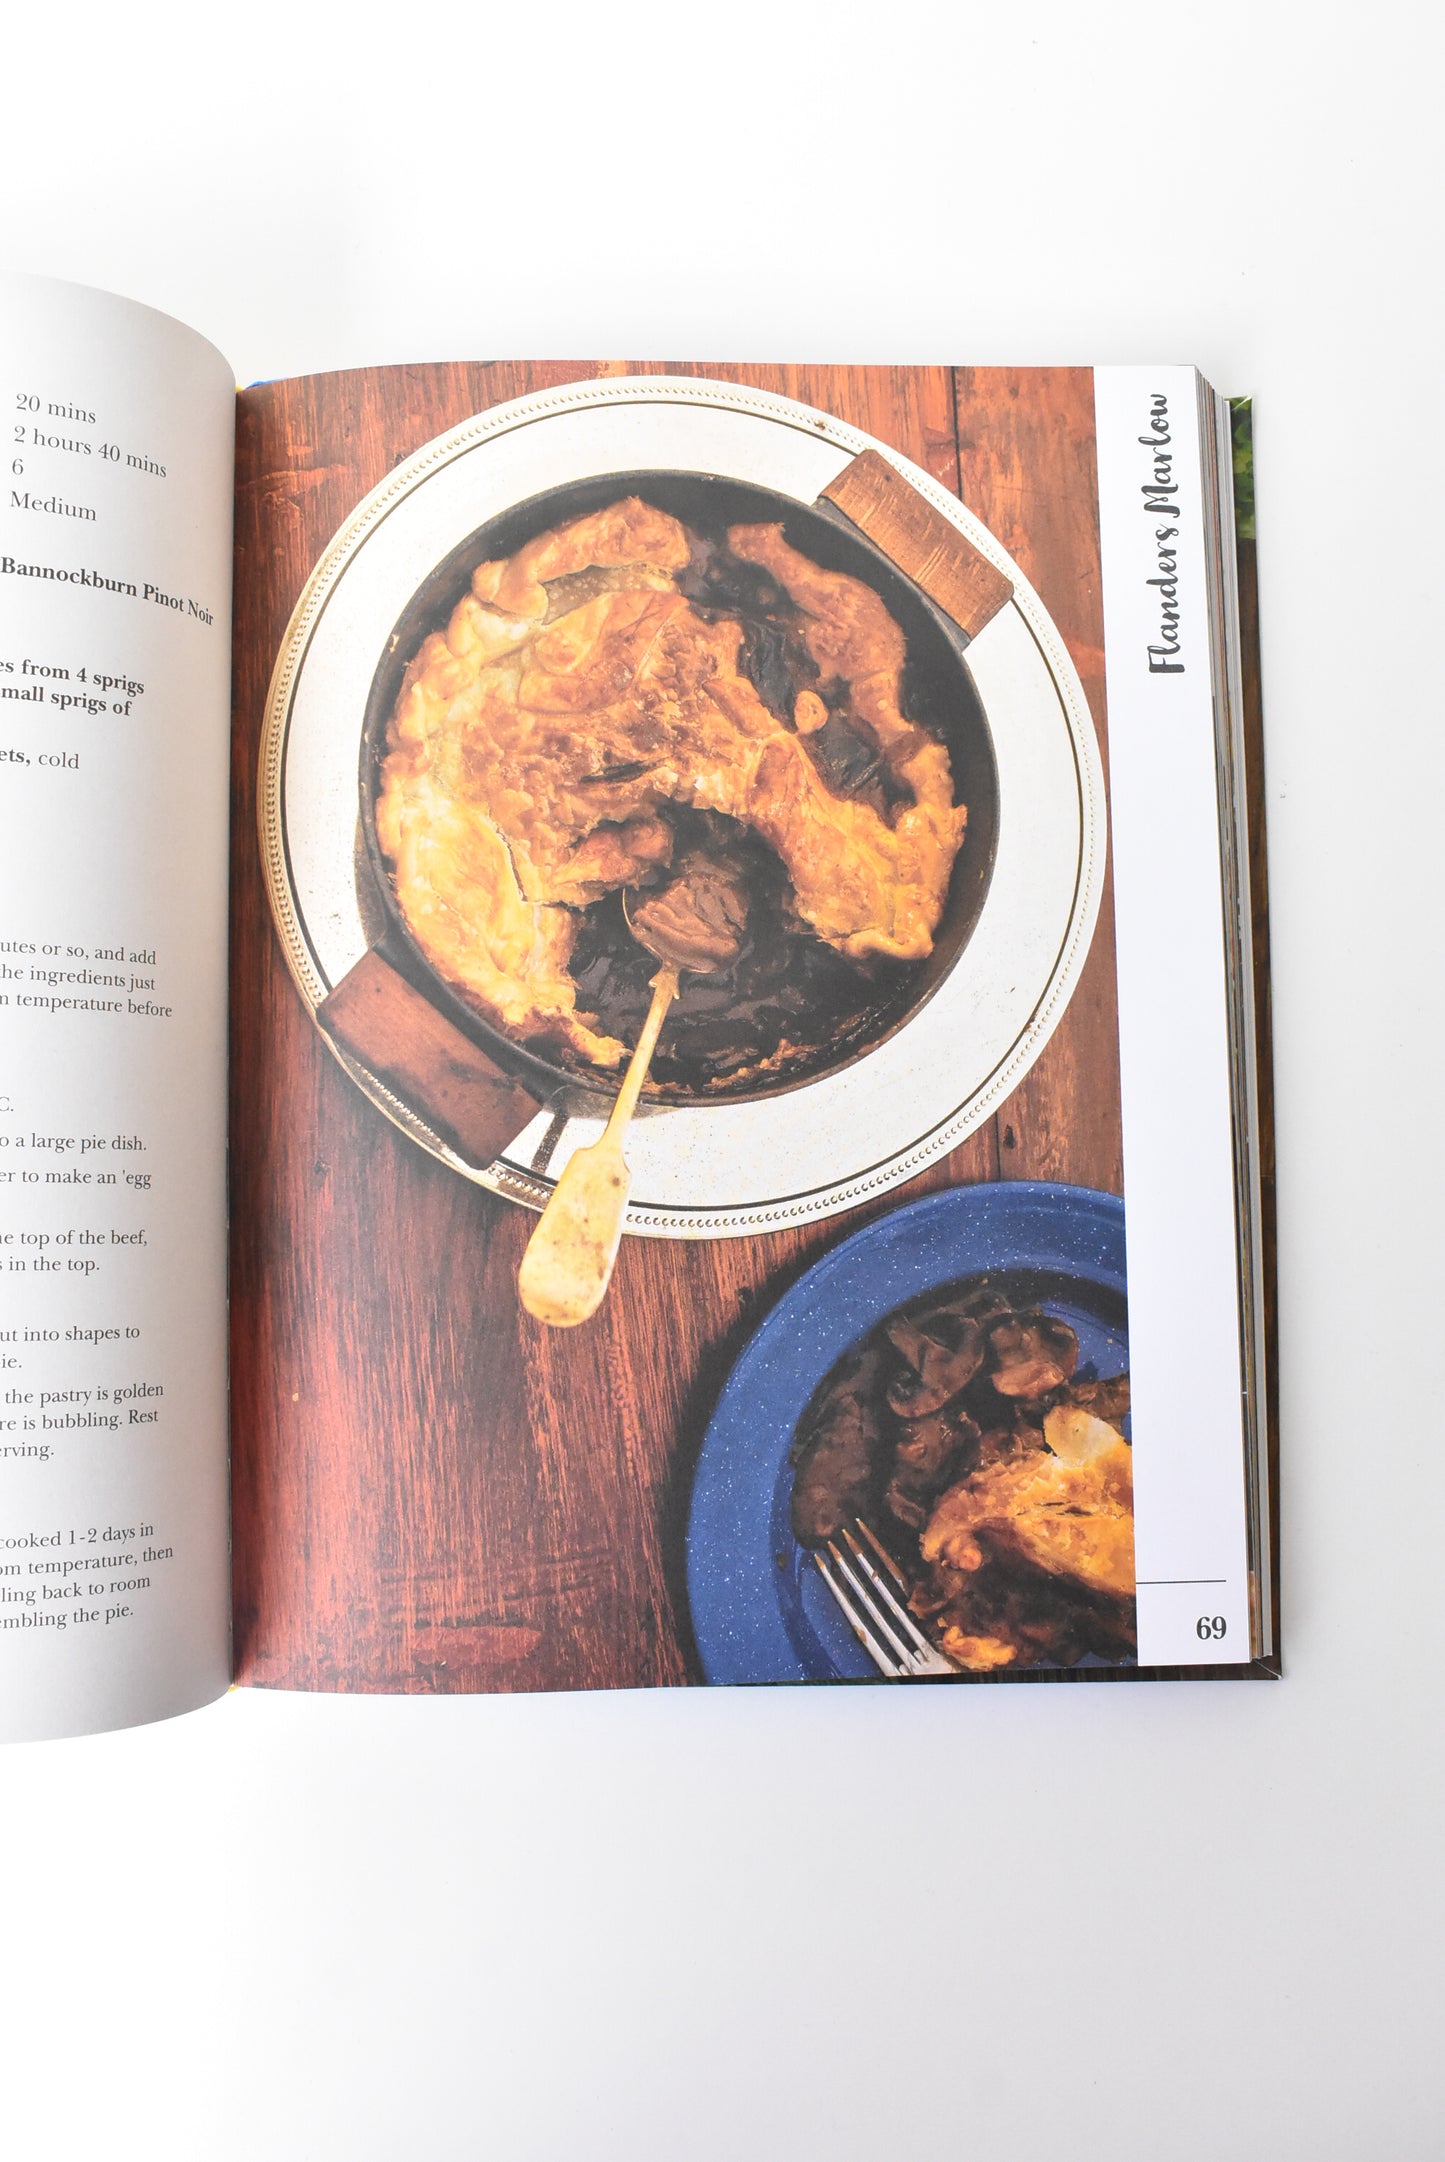 What's Cooking Vol. 1. Otago Businesses Share Their Favourite Recipes